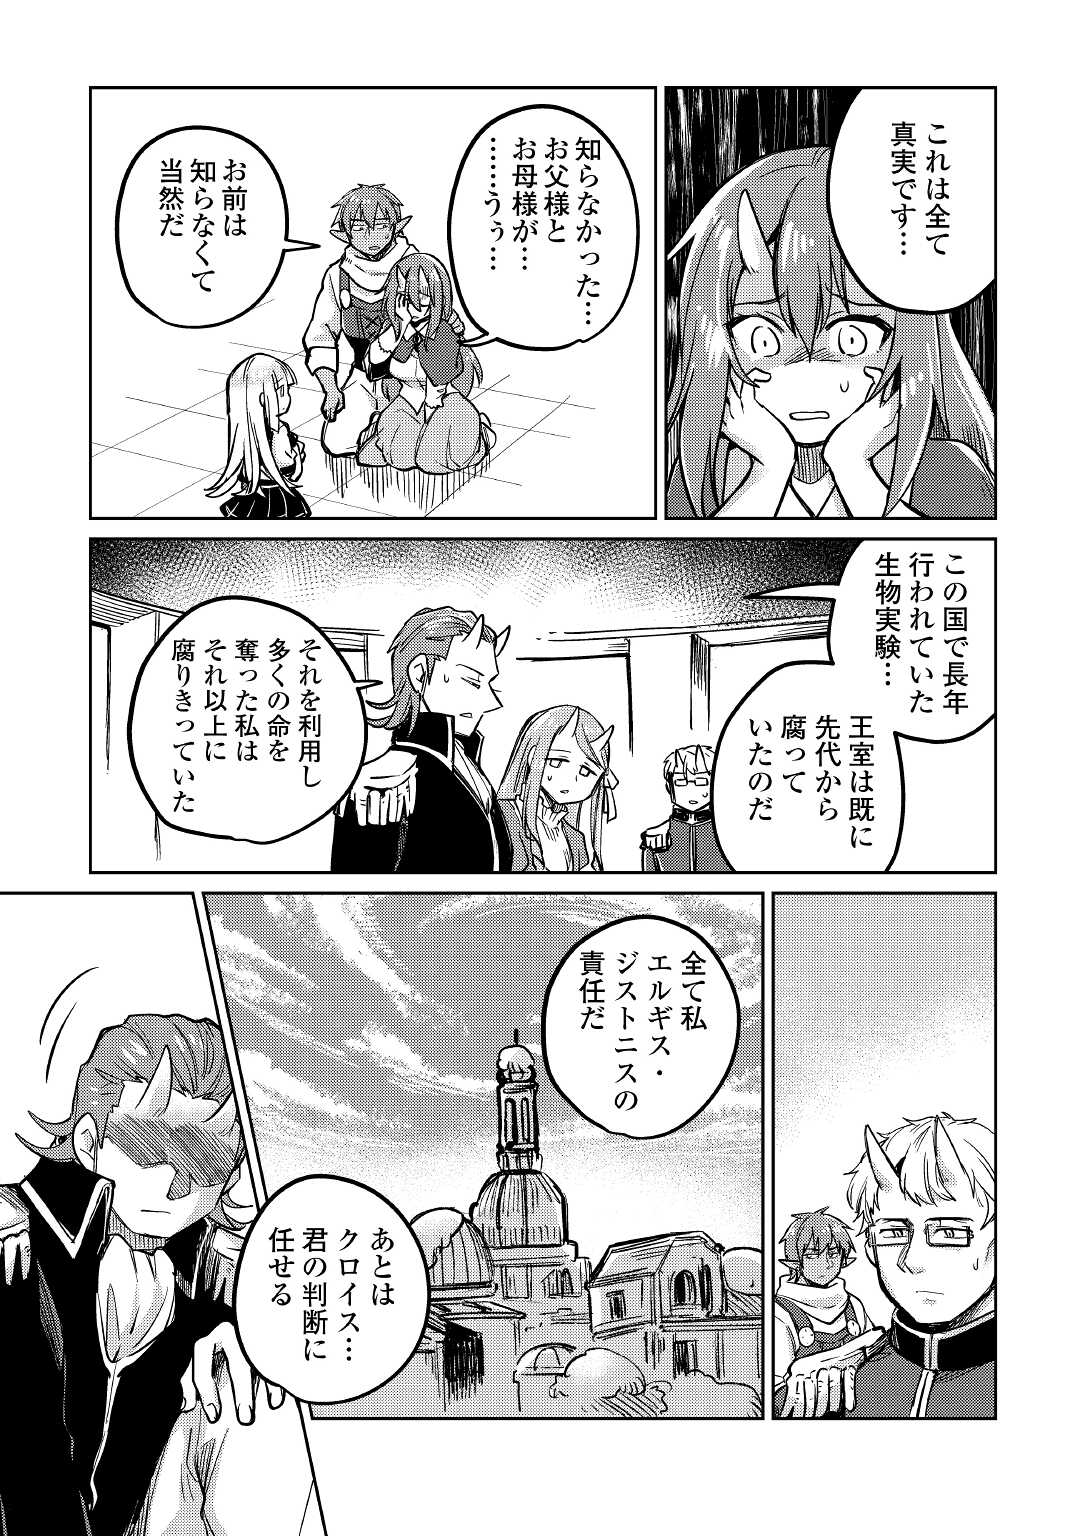 The Former Structural Researcher’s Story of Otherworldly Adventure 第40話 - Page 13